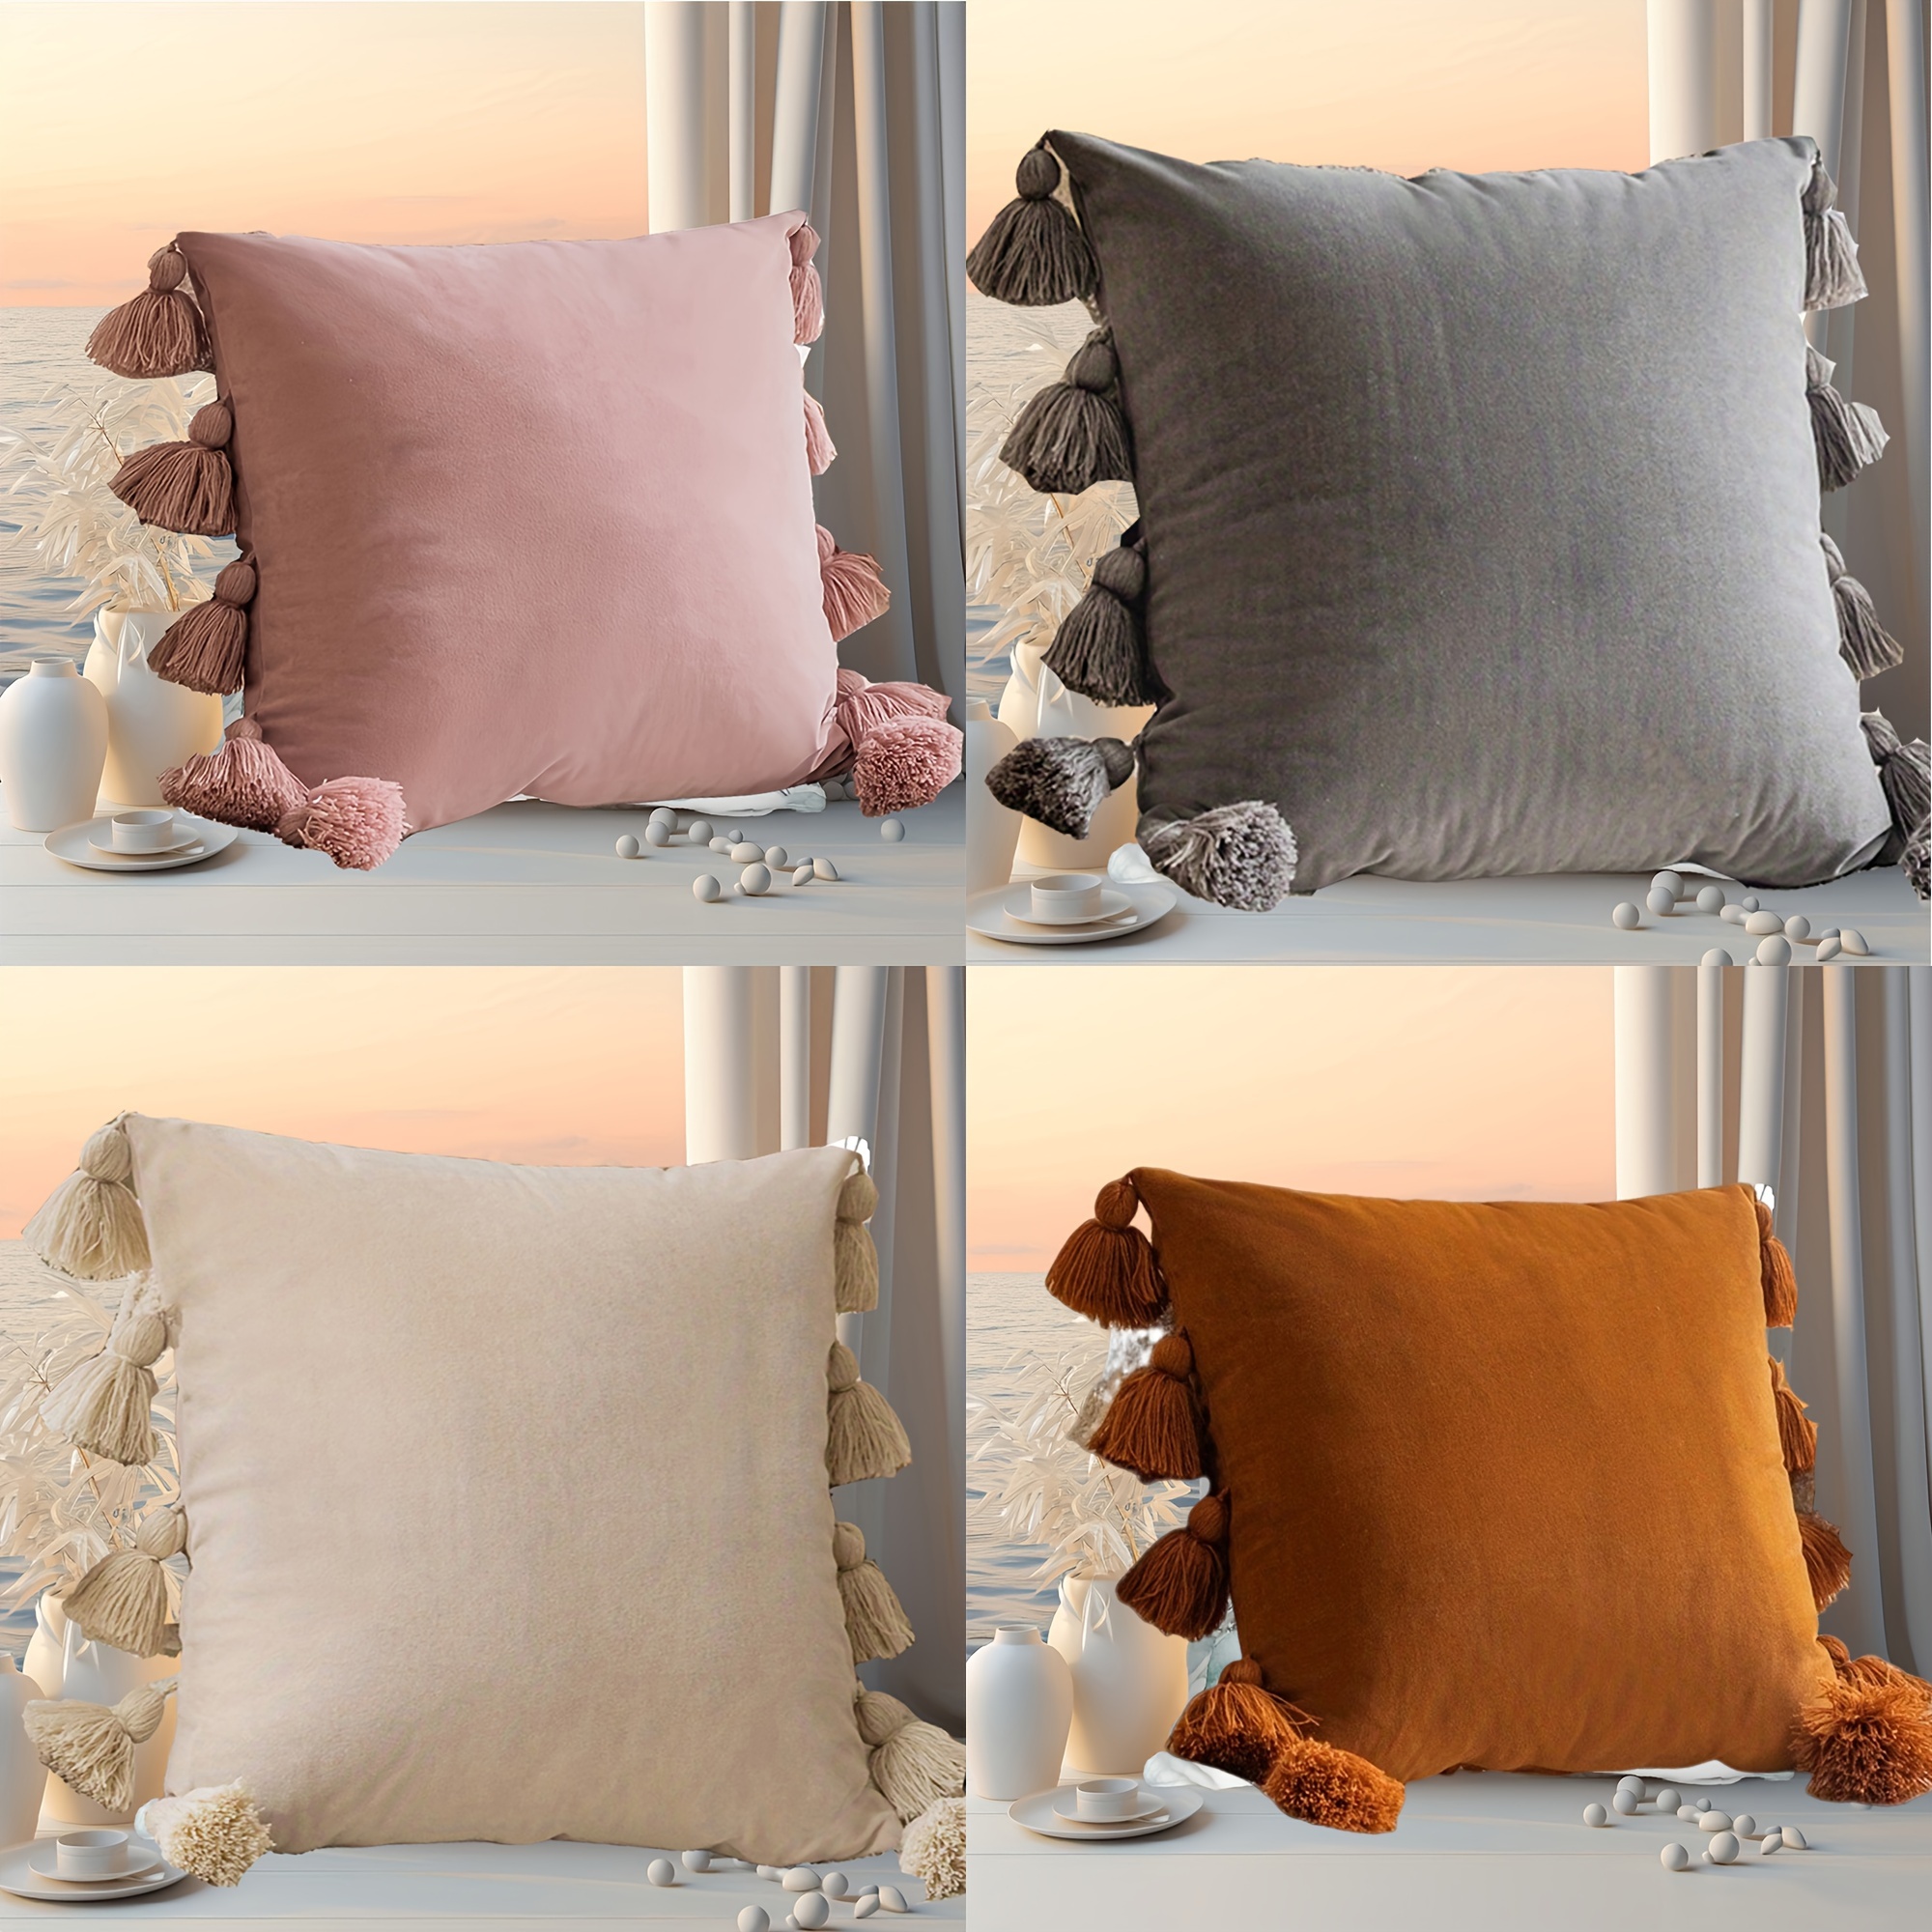 

1pc, Cute Boho Style Decorative Throw Pillow Covers With Handmade Tassels, Soft Velvet Solid Color Square Cushion Cover Set For Sofa Sofa Bedroom Car Living Room Home Decor, Without Pillow Insert.